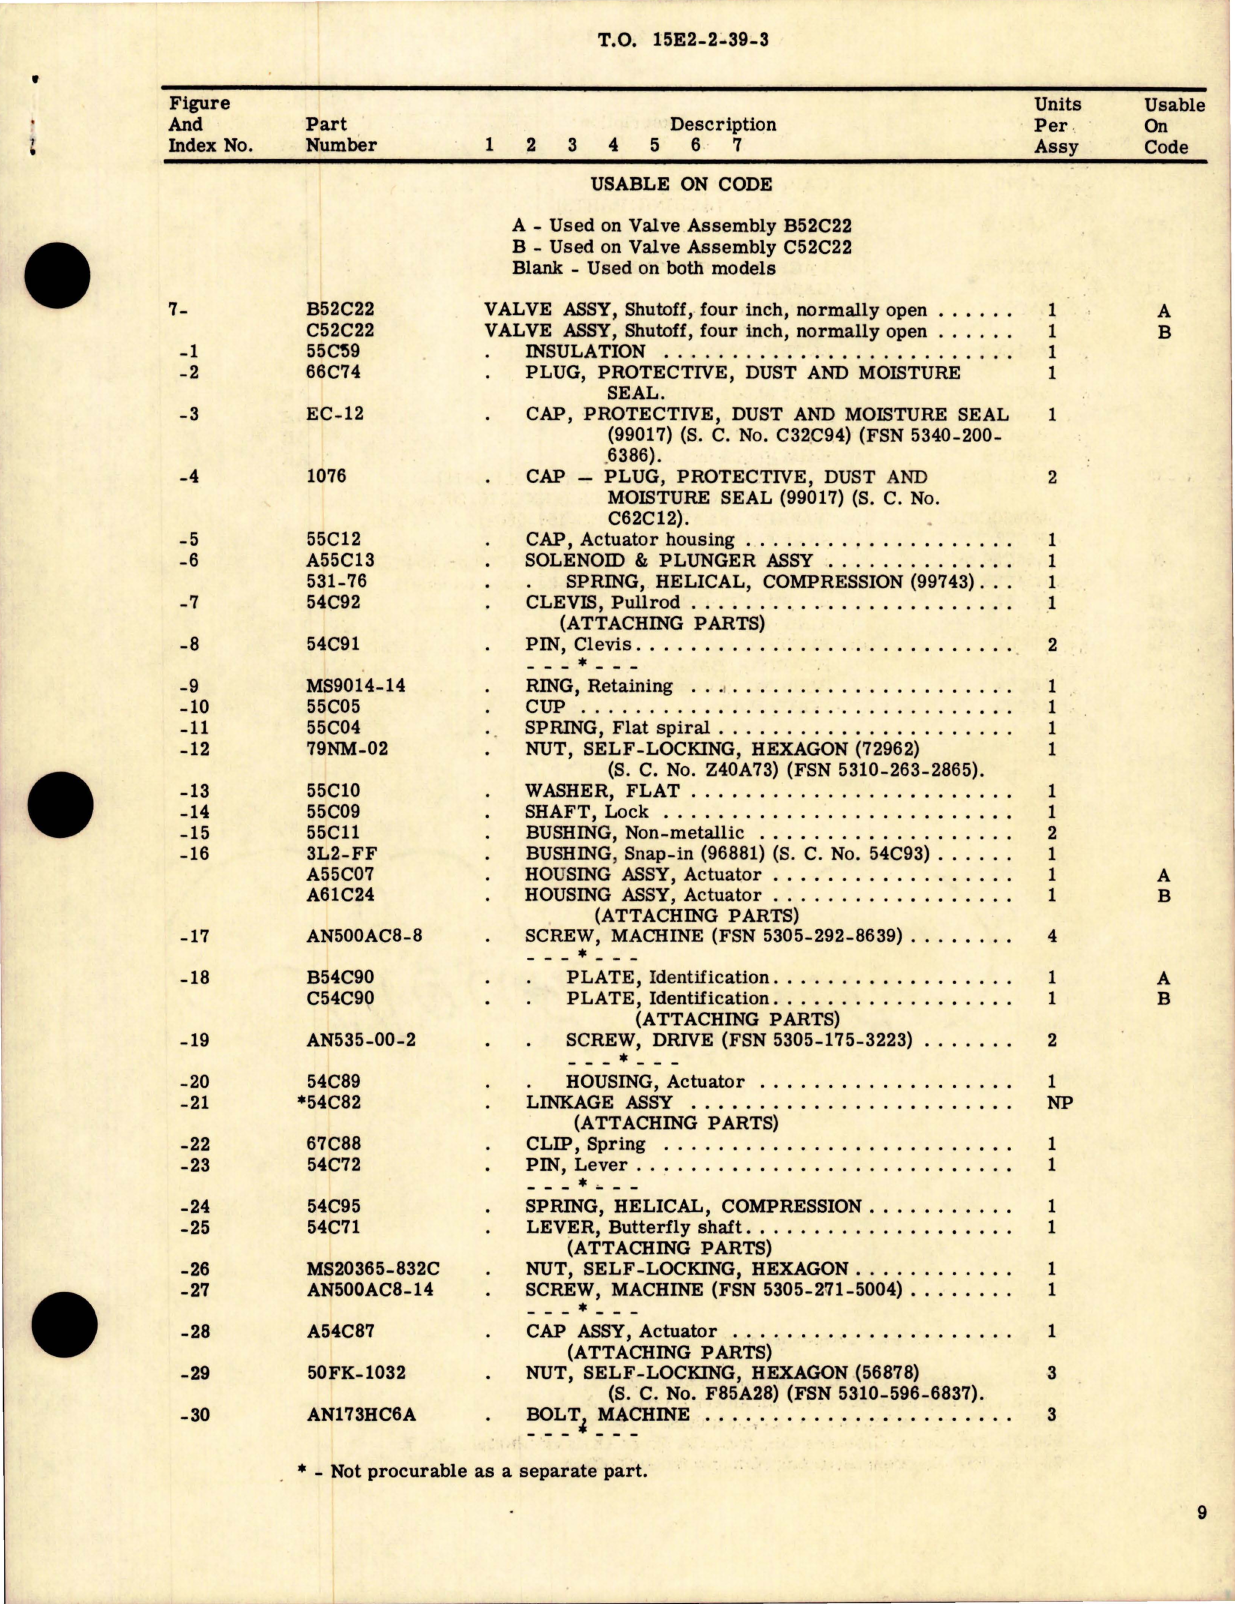 Sample page 5 from AirCorps Library document: Overhaul Instructions with Parts Breakdown for Shutoff Valve Assemblies - Part B52C22 and C52C22 